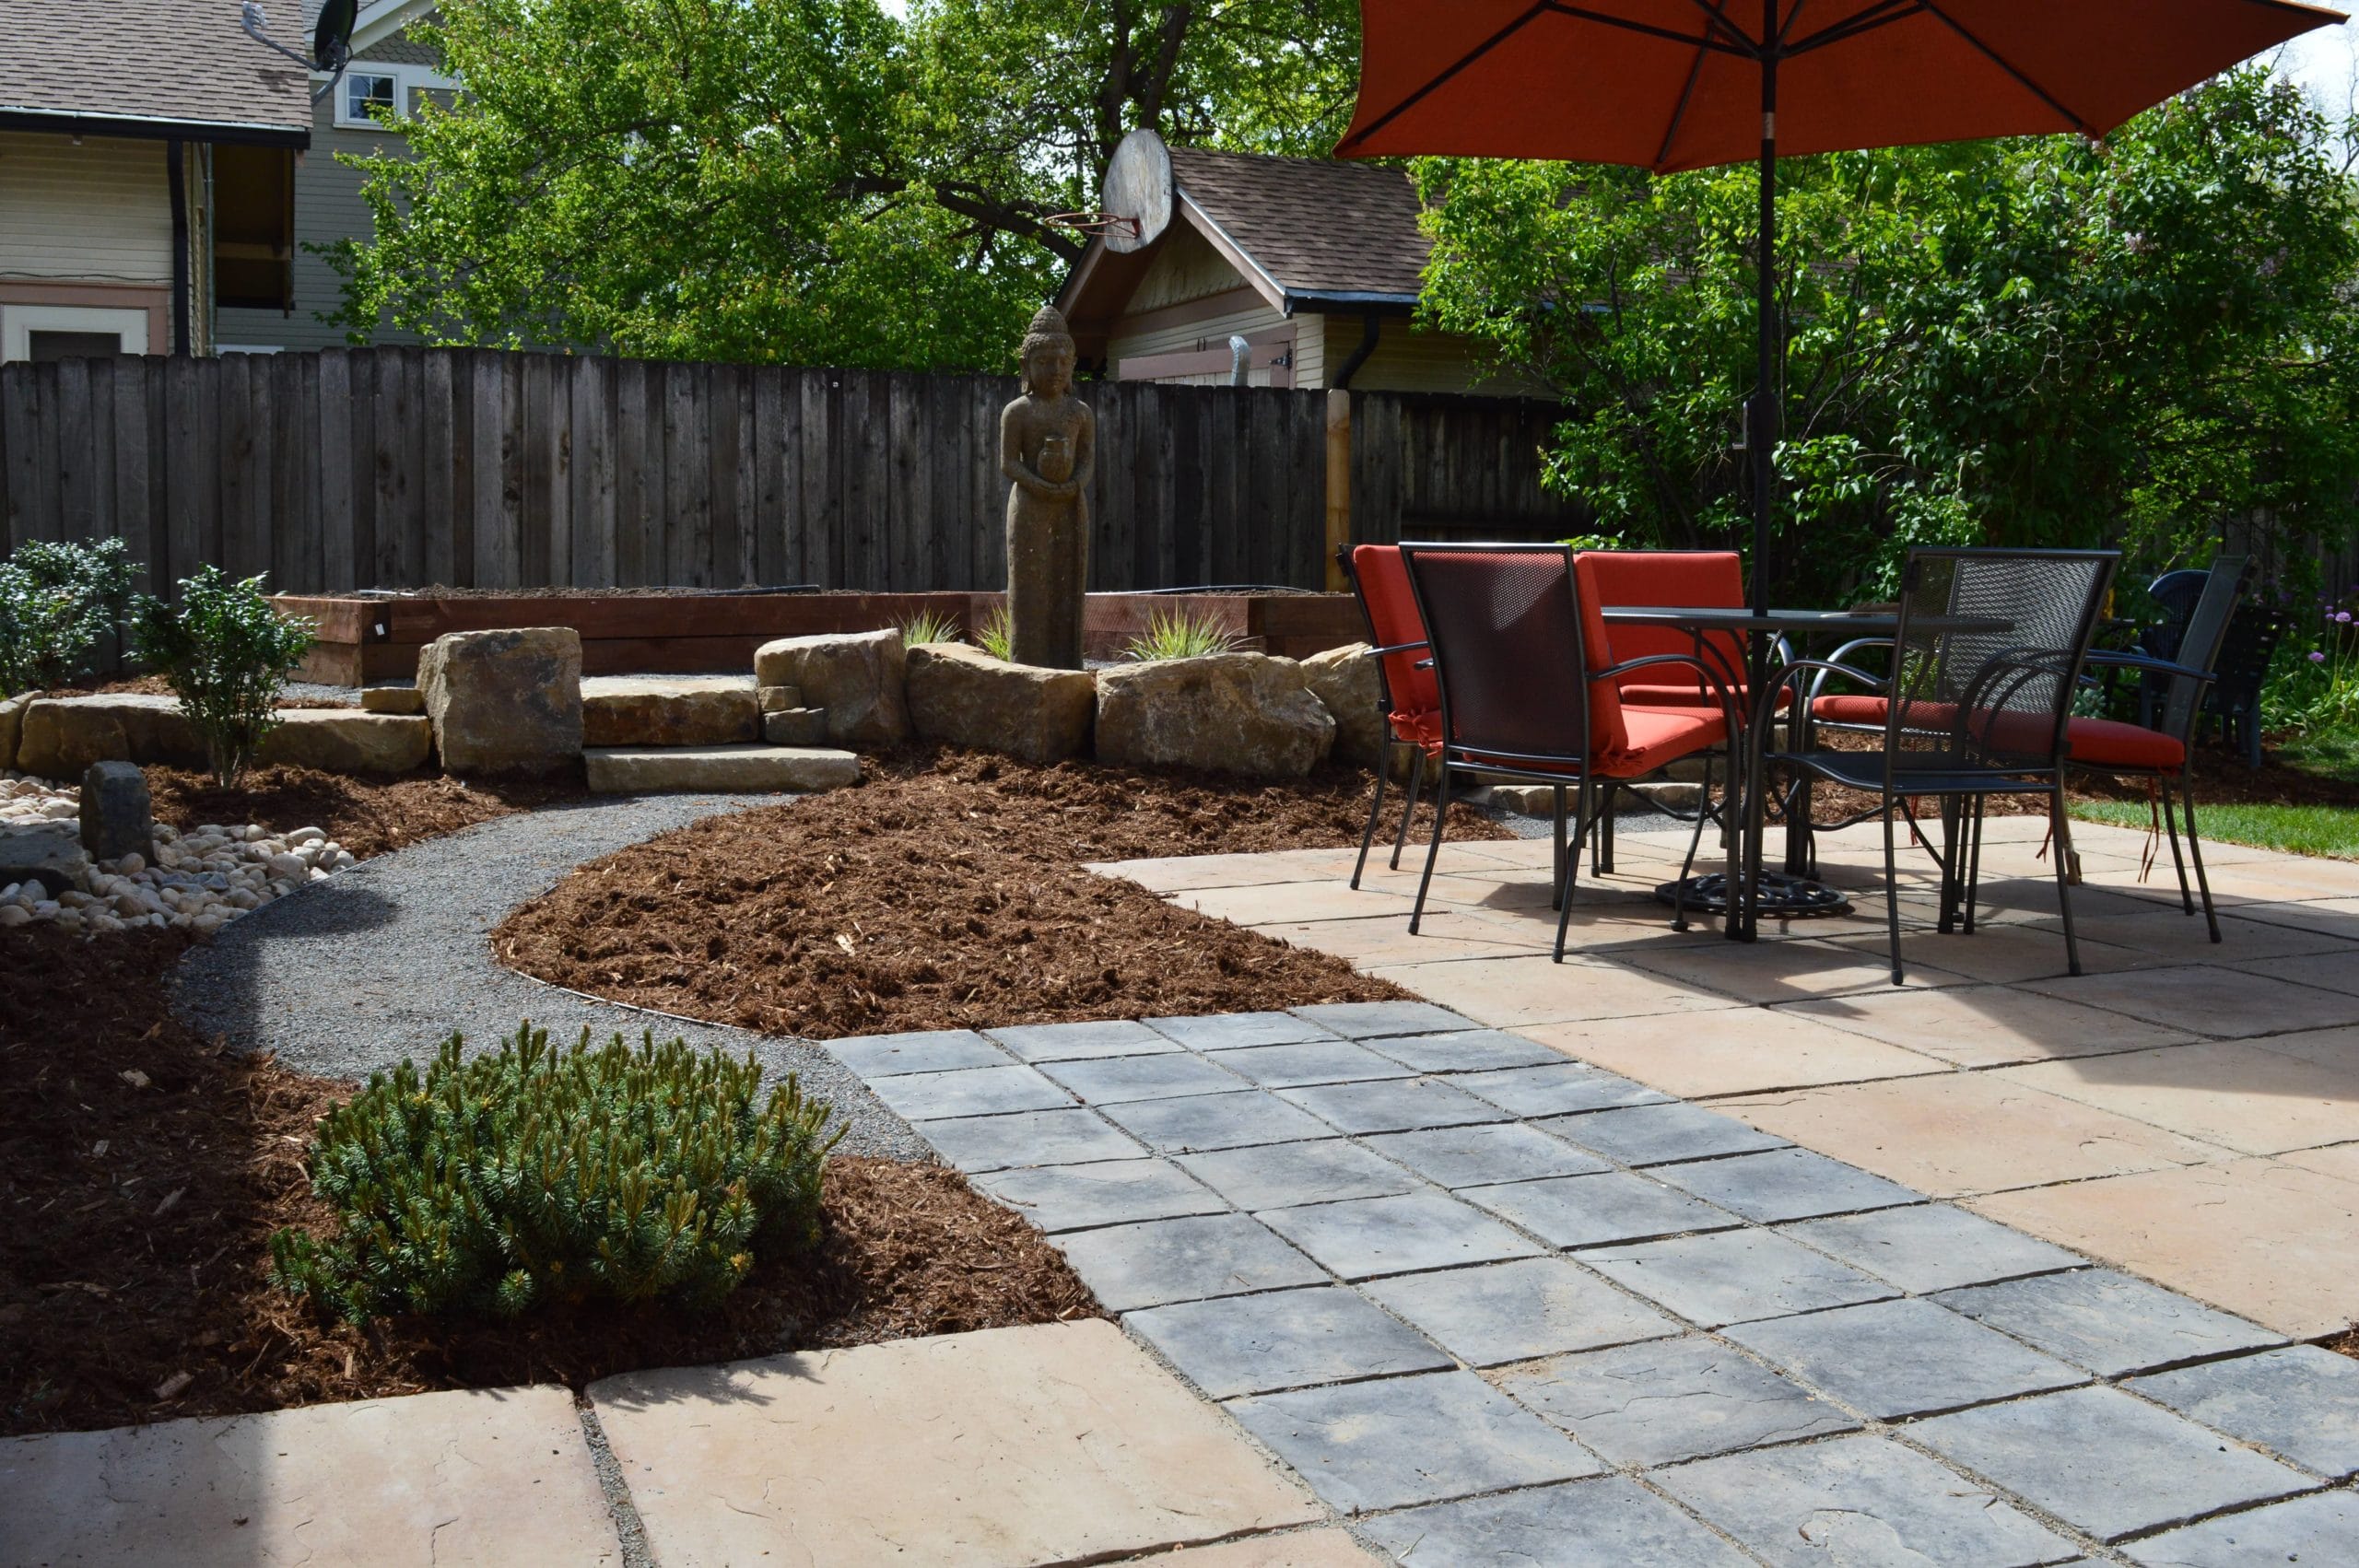 Flat stone patio with gravel path up to raised garden beds. Edged by mulch and landscape rock filled with plants and bushes.